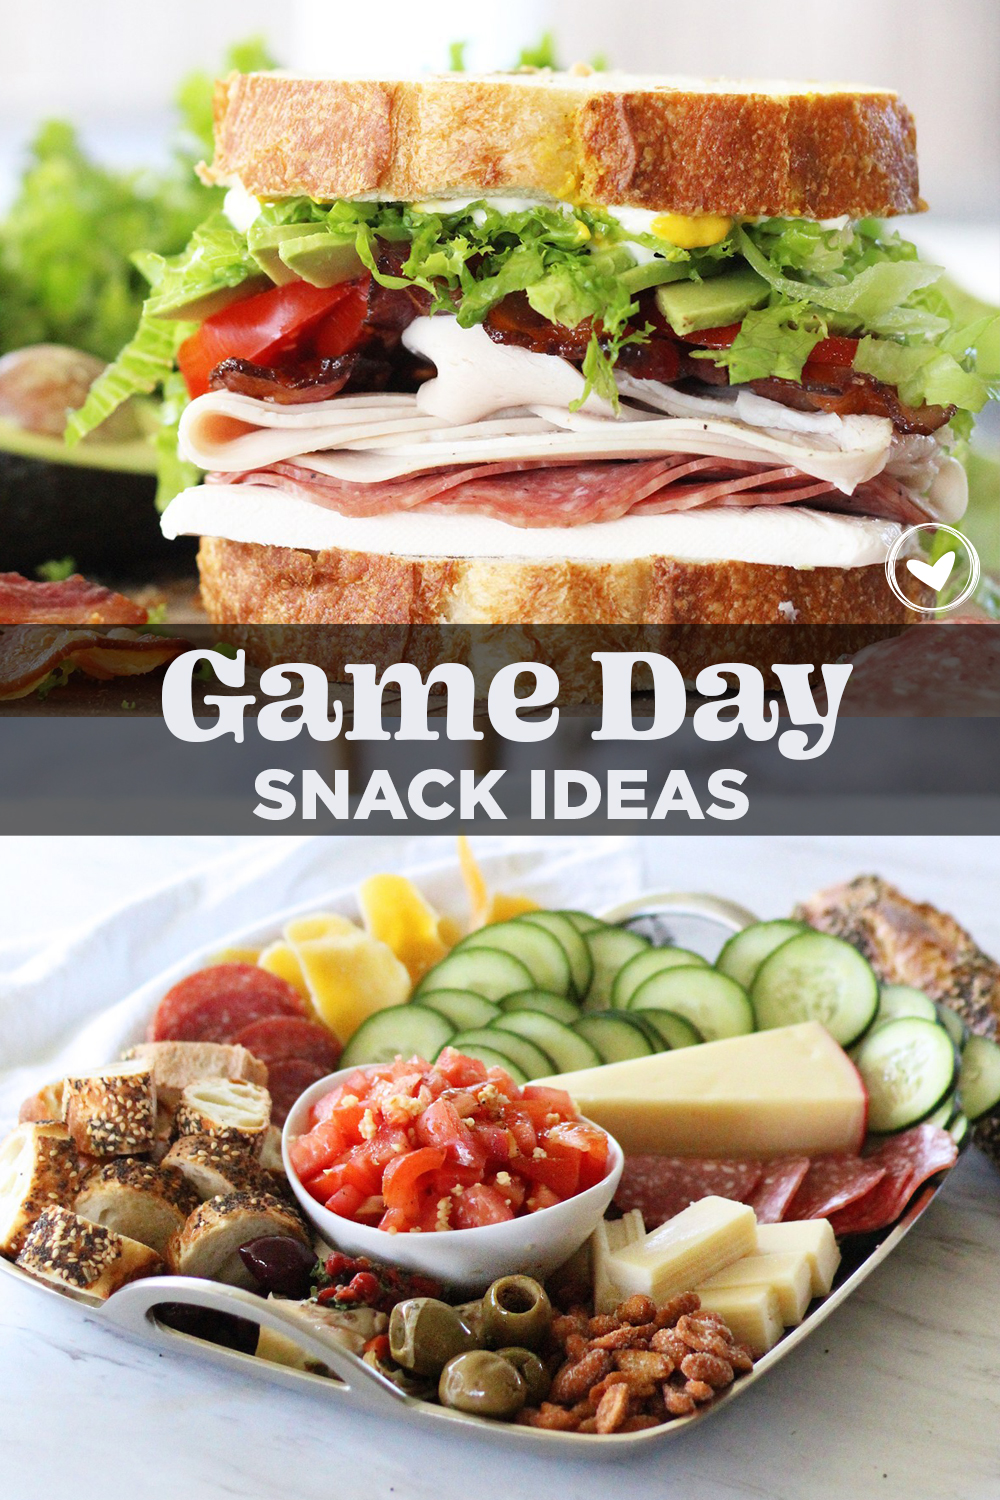 Game Day Snack Ideas